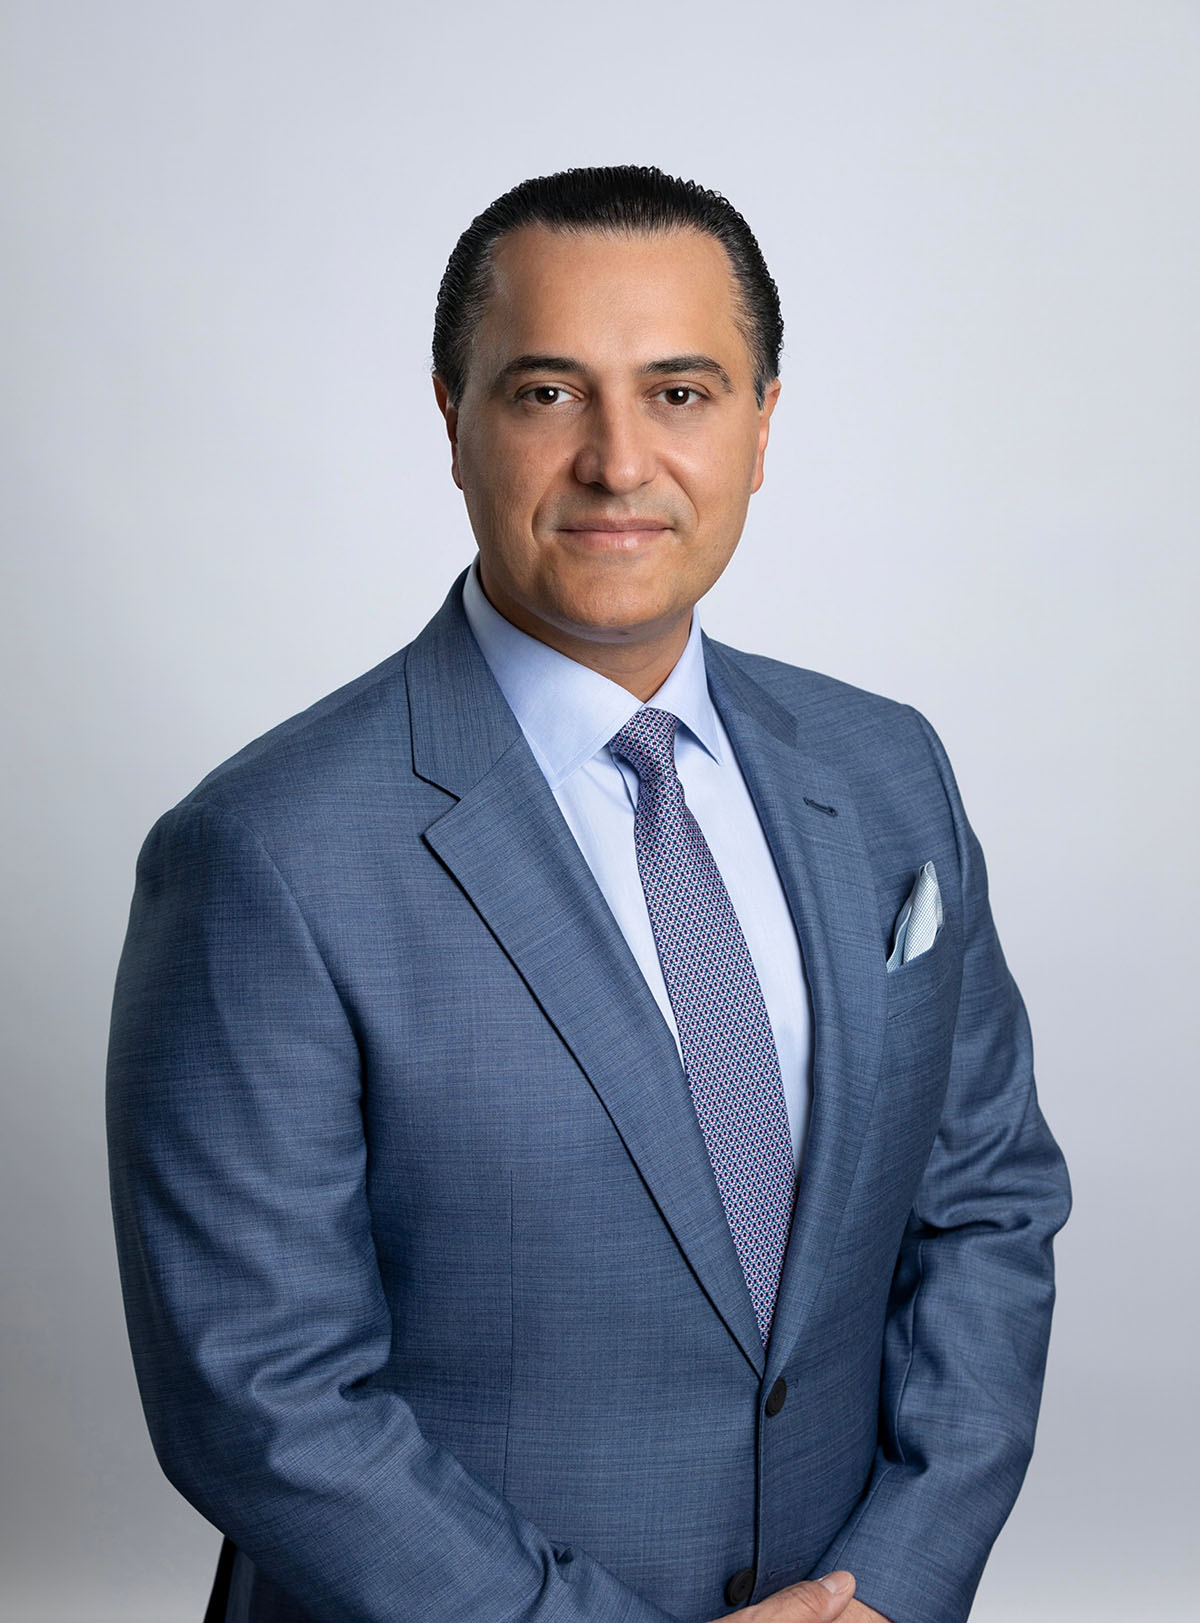 Dr. Sammy Eghbalieh, the top-rated vascular surgeon at Southern California Multi-Specialty Center in Los Angeles